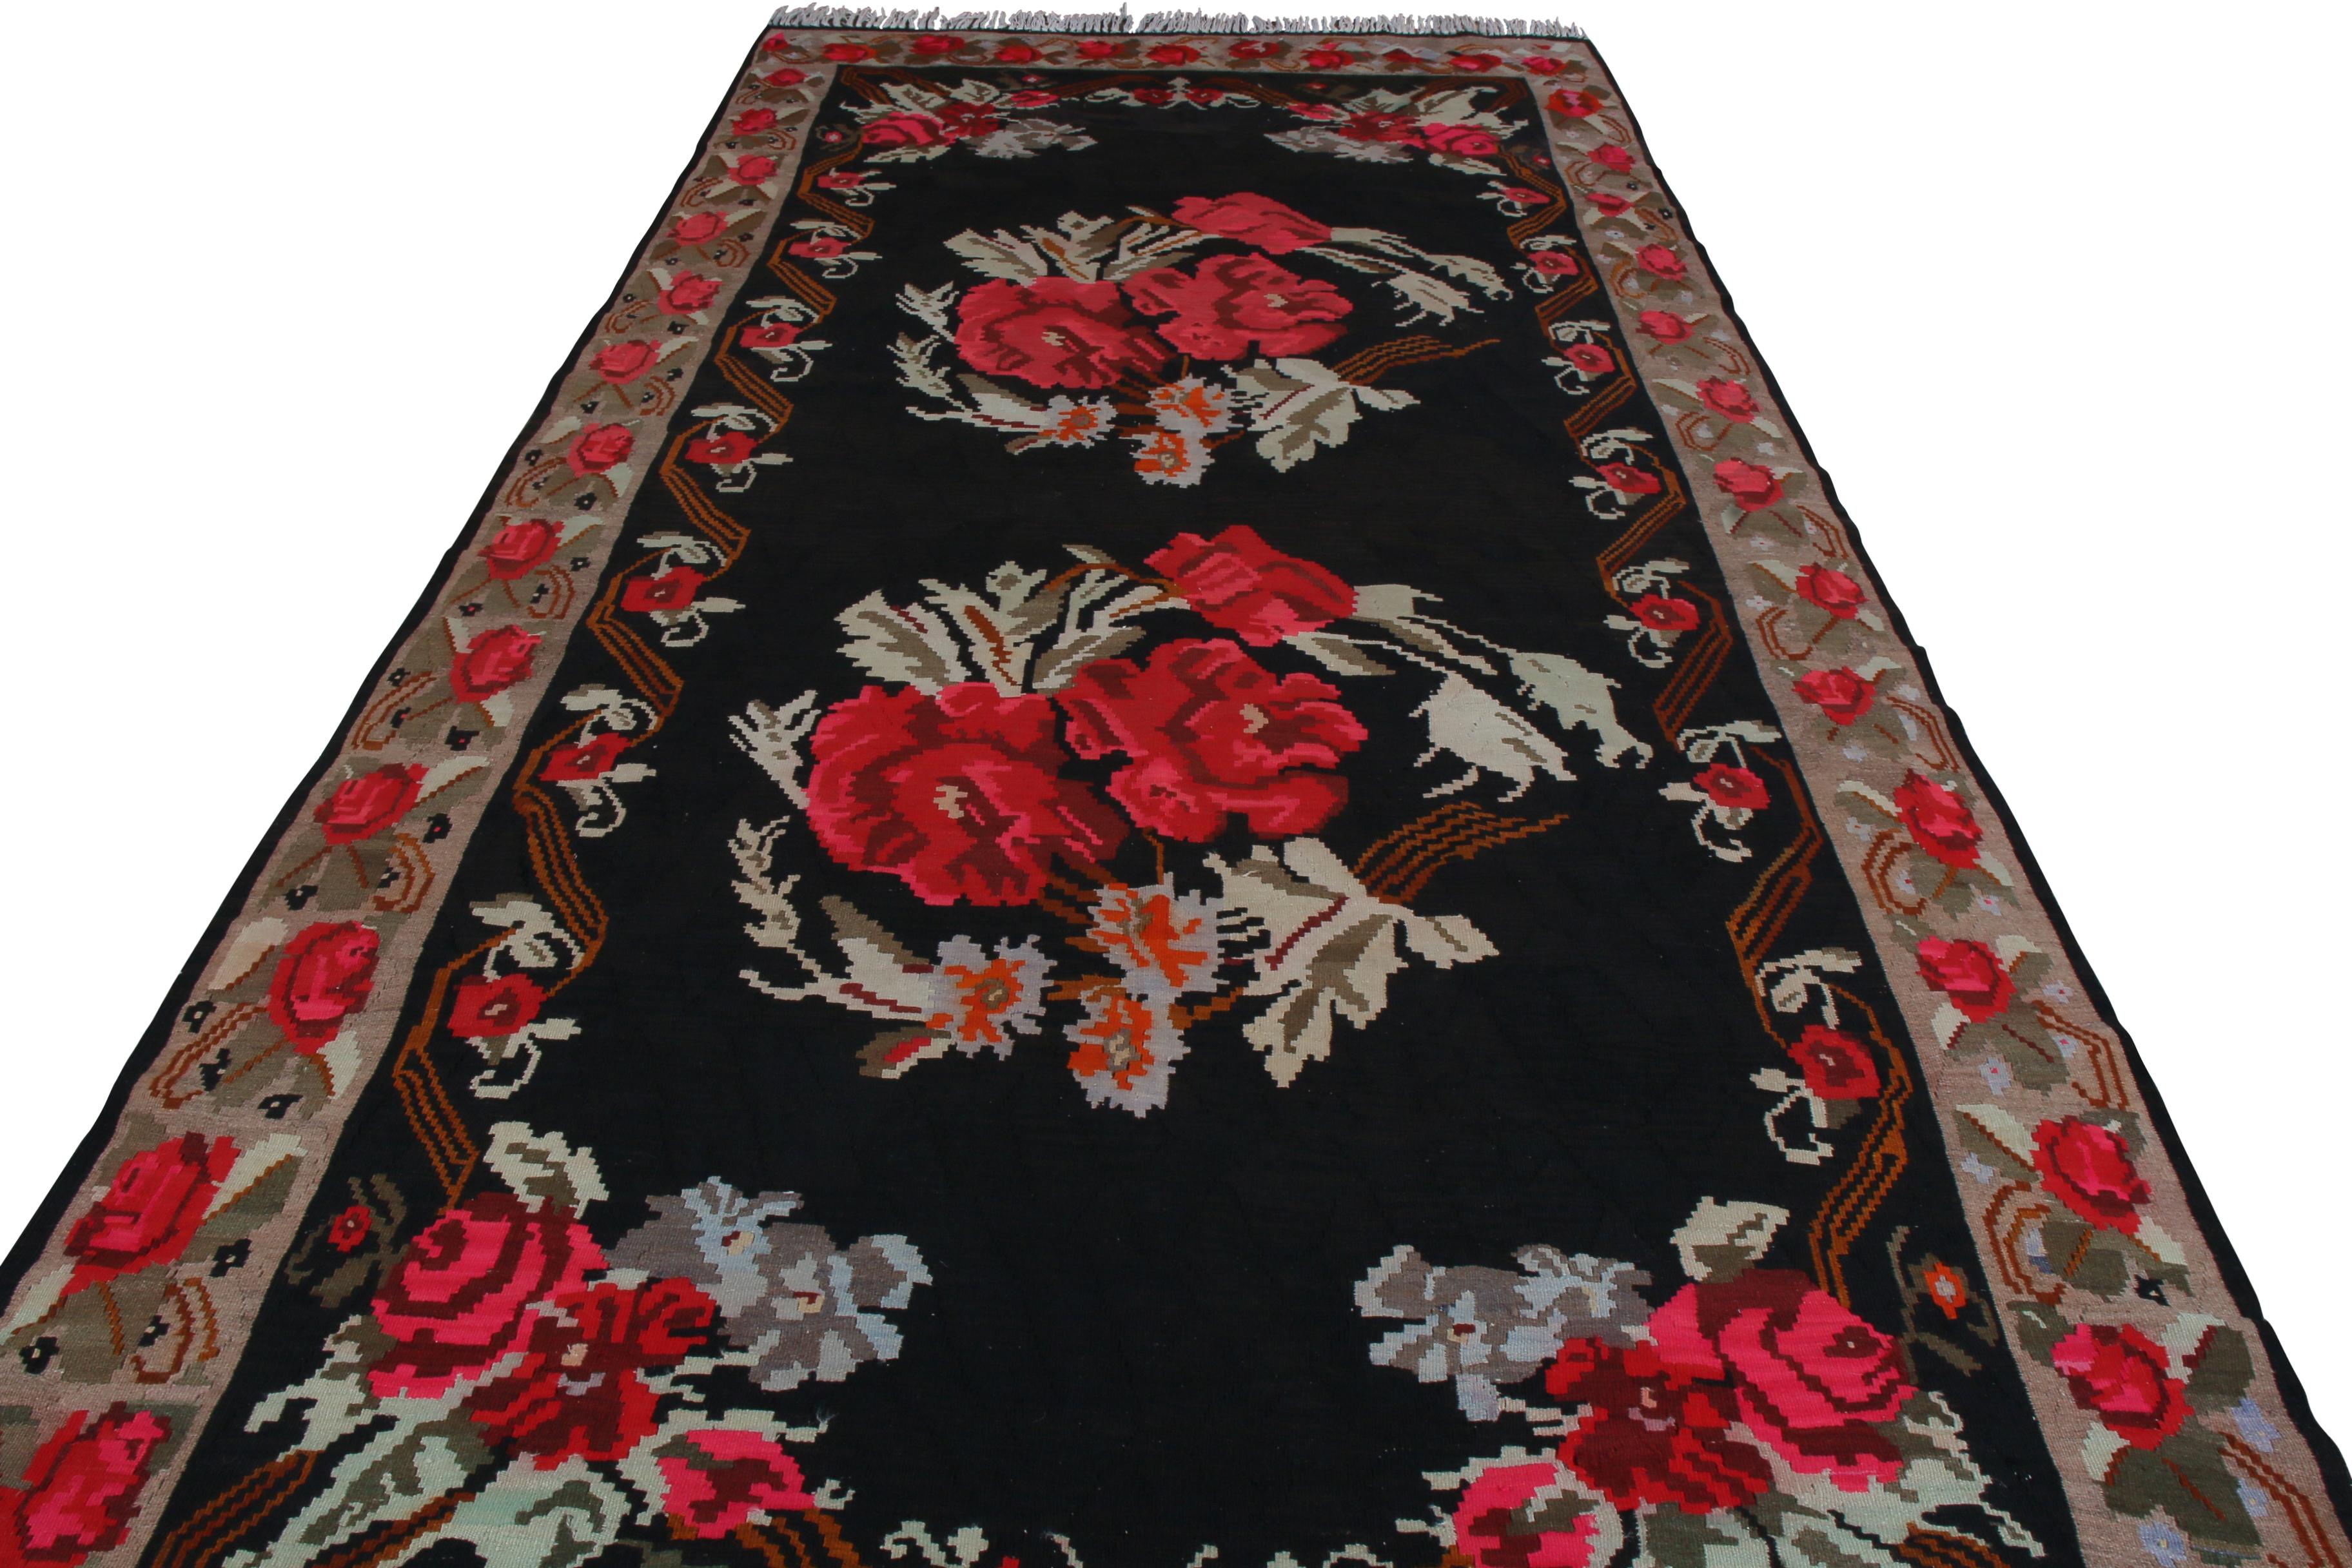 Handwoven in wool originating from Turkey circa 1950-1960, this item is a vintage floral Bessarabian kilim, affording a romantic touch to a room akin to the Romanian kilim style inspired in its design. On a black background, two bouquets of bright